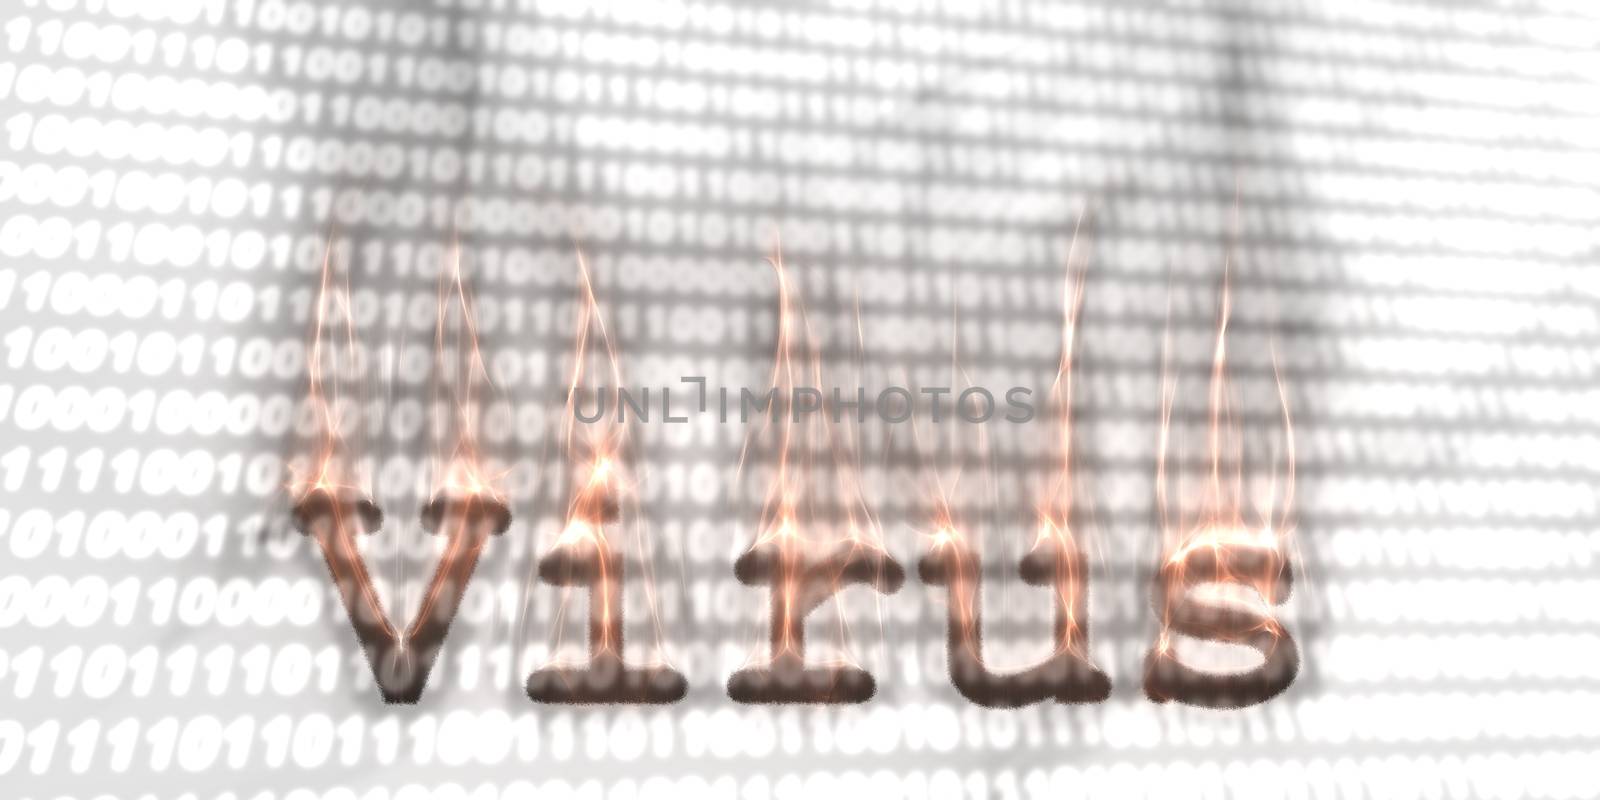 Banner of internet security buzzword text done with kirlian aura by MP_foto71